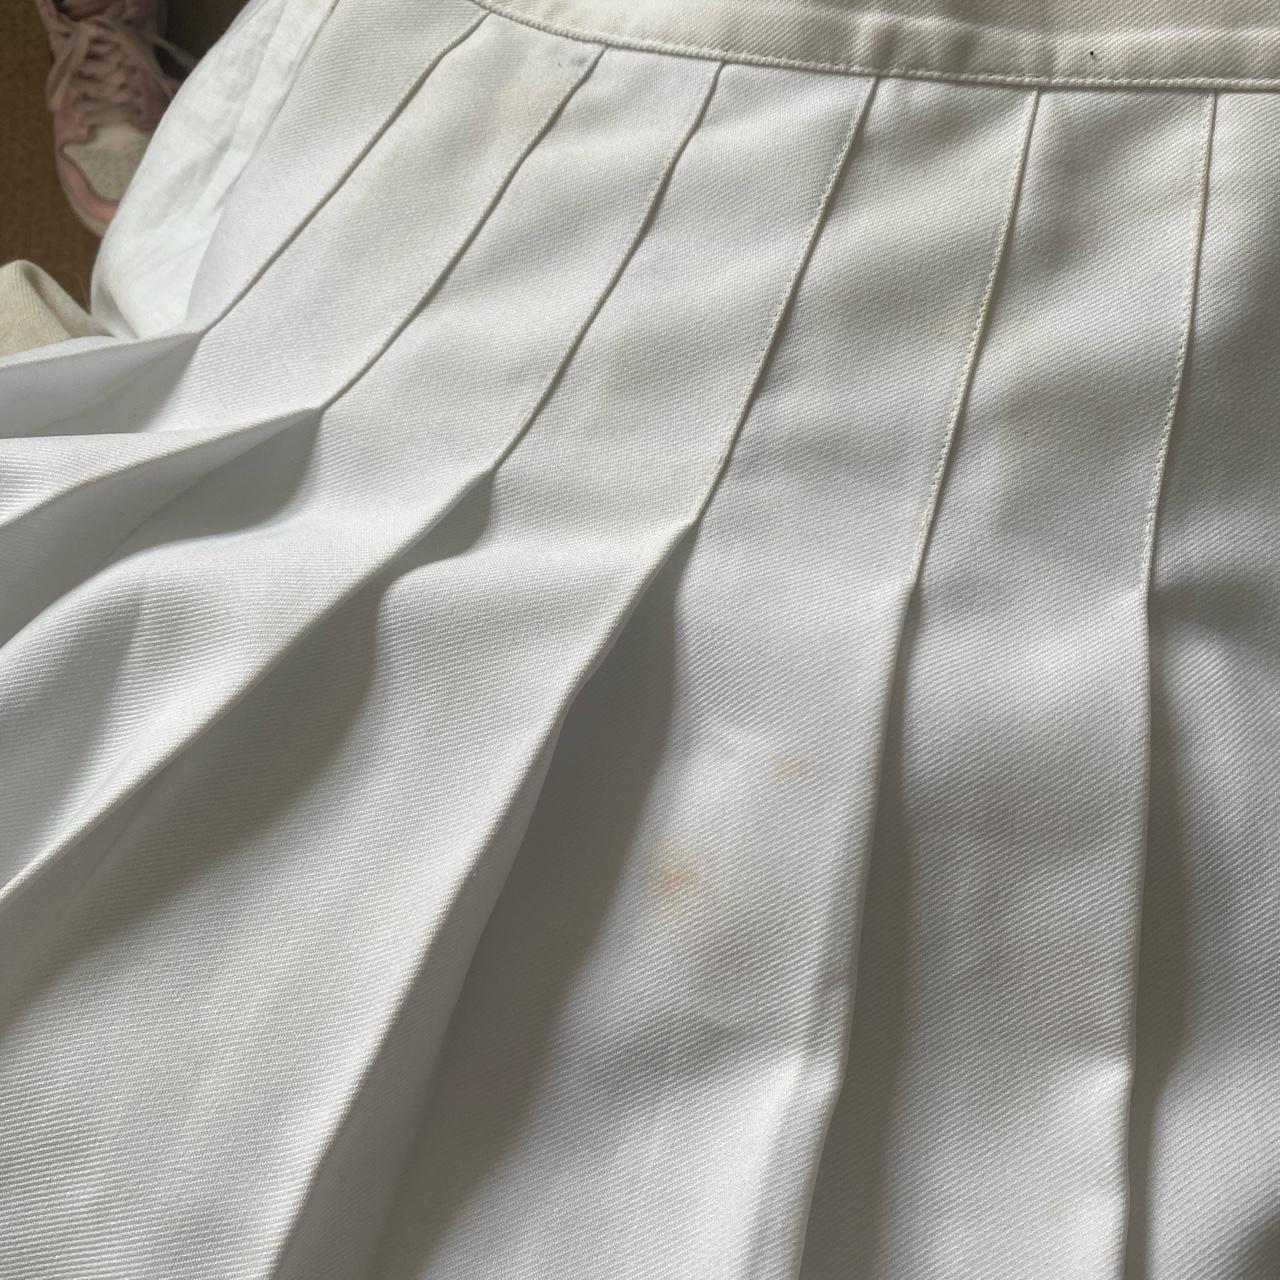 White American Apparel pleated skirt - worn out for... - Depop